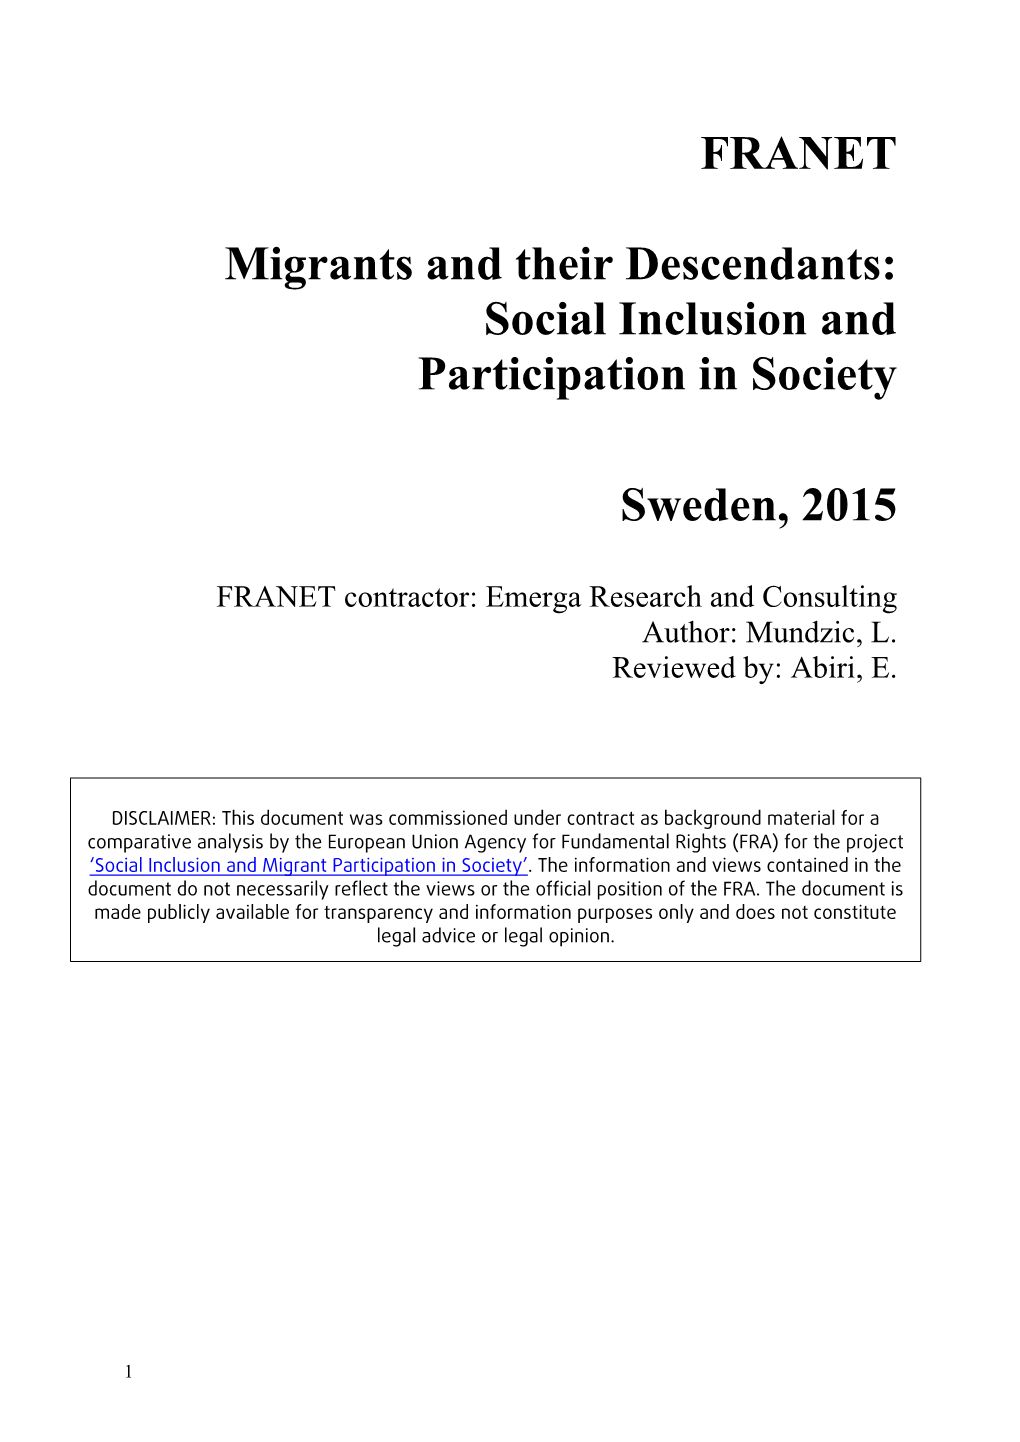 Social Inclusion and Participation in Society Sweden, 2015